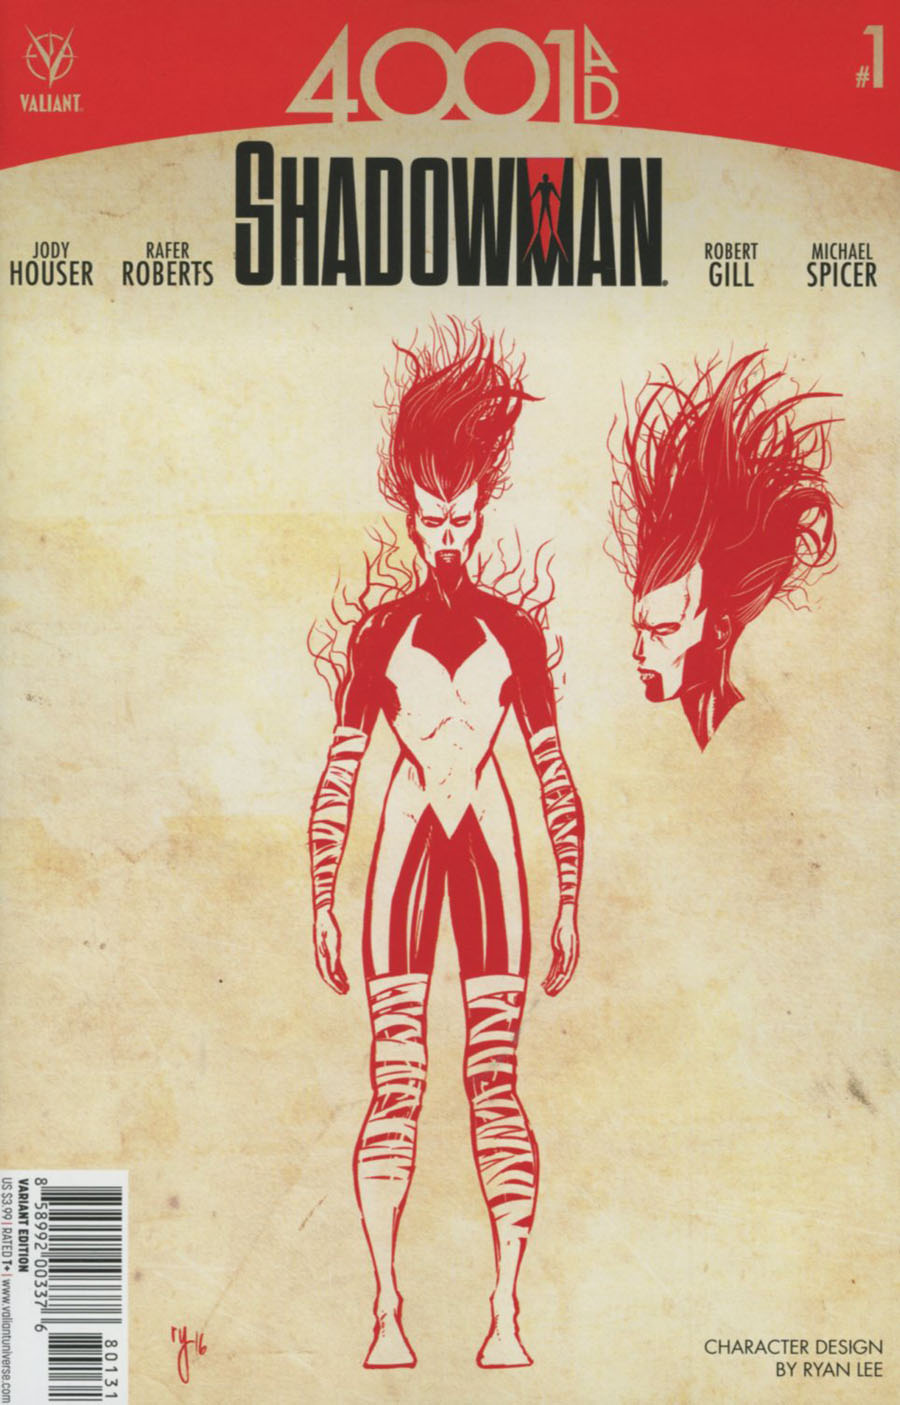 4001 AD Shadowman #1 Cover C Incentive Ryan Lee Character Design Variant Cover